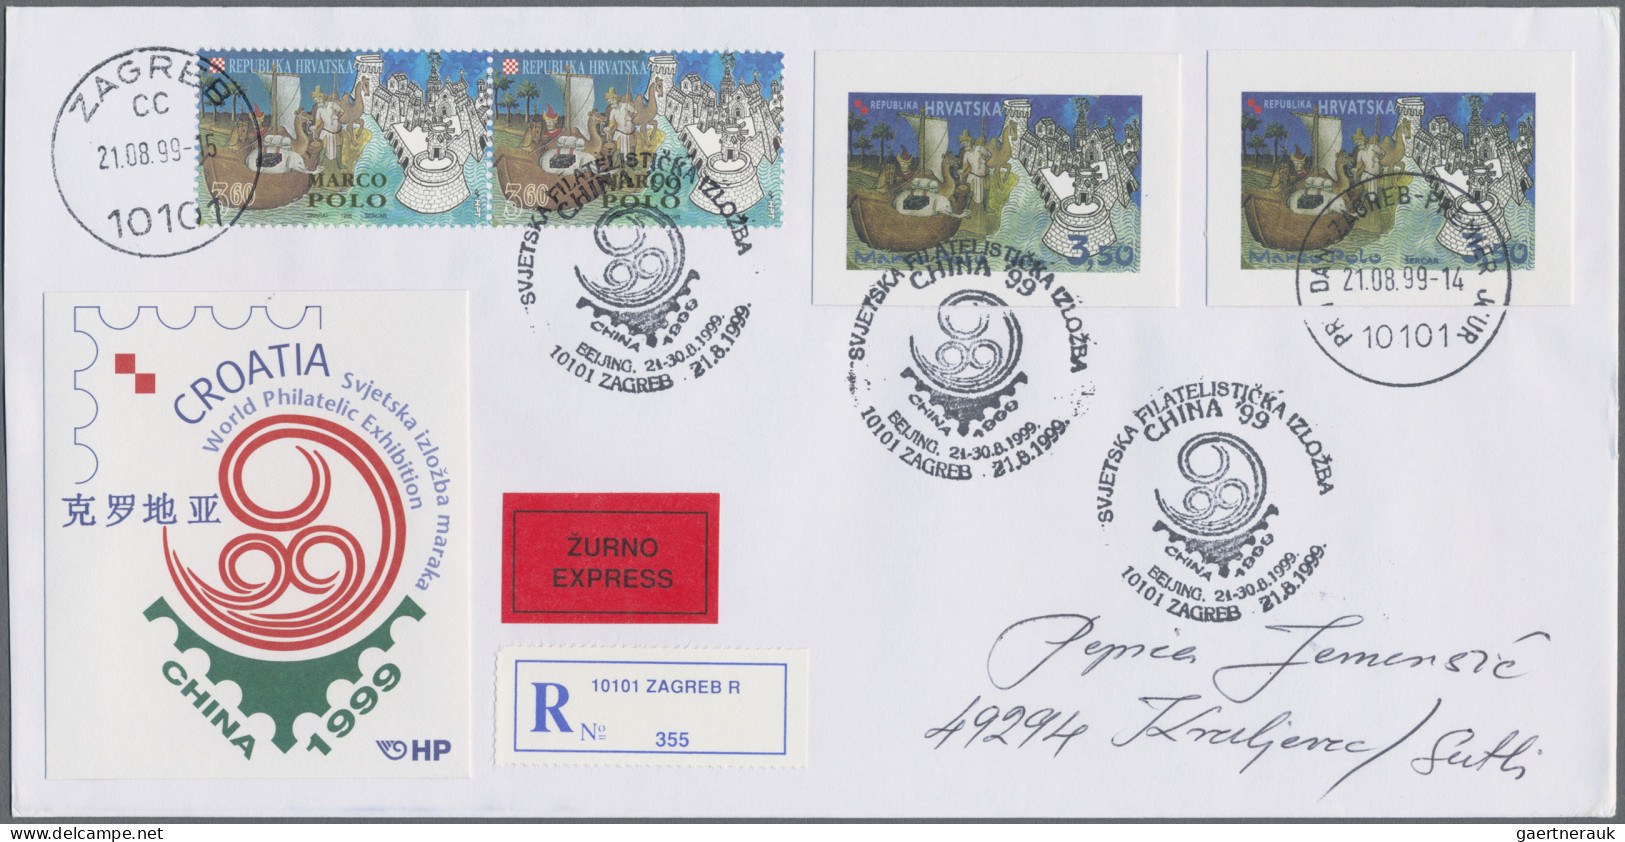 Croatia: 1991/2000, collection of apprx. 650 covers/cards in five Lindner binder